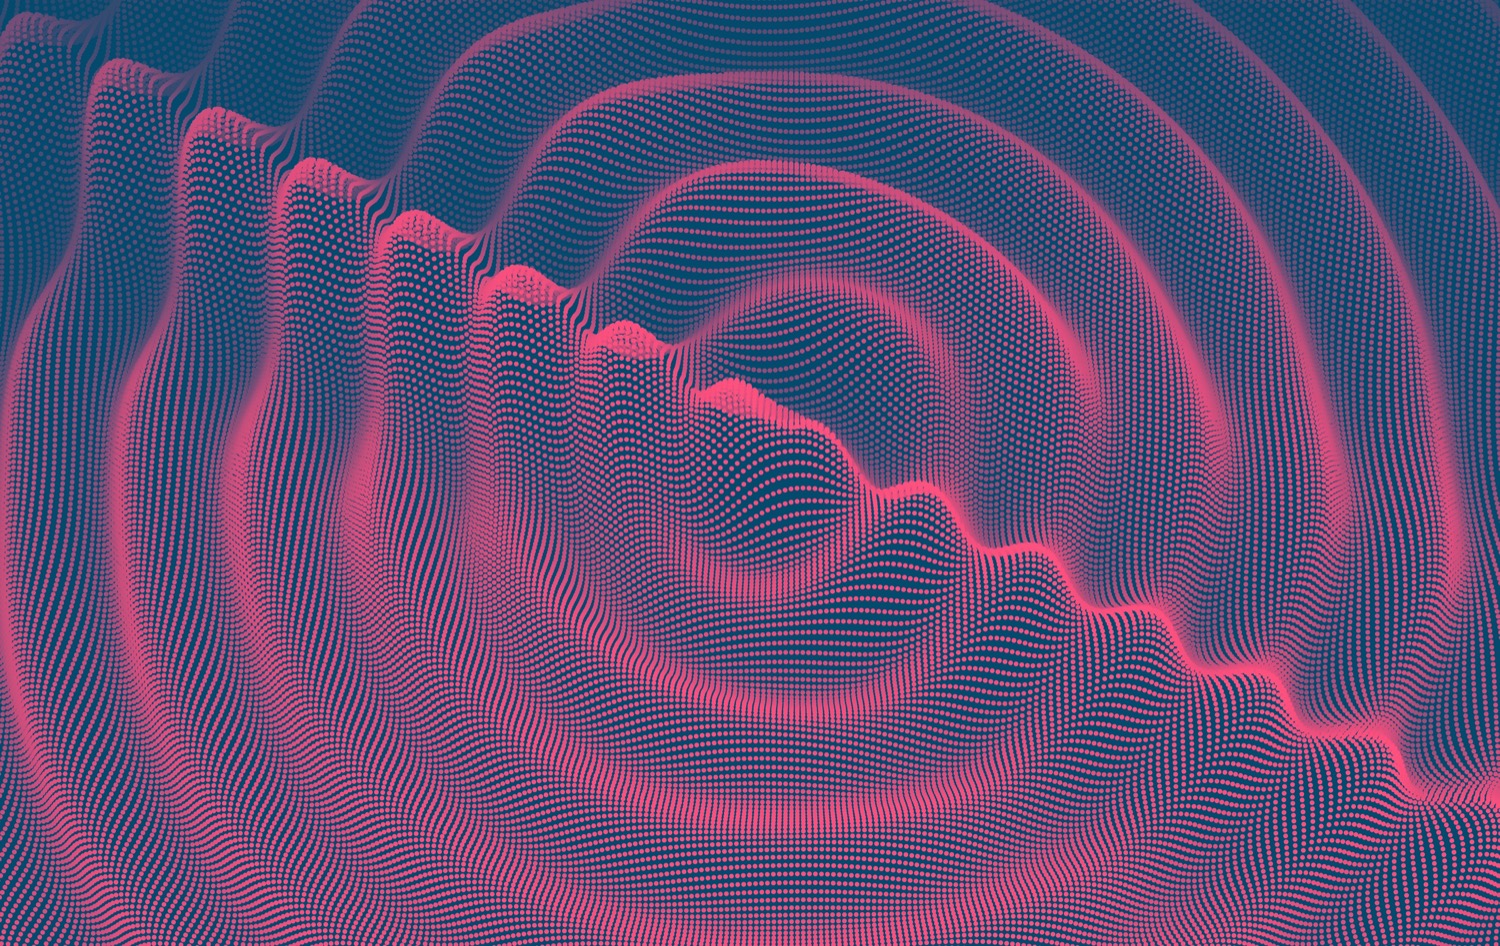 an abstract 3d computer rendering of a series of ripples